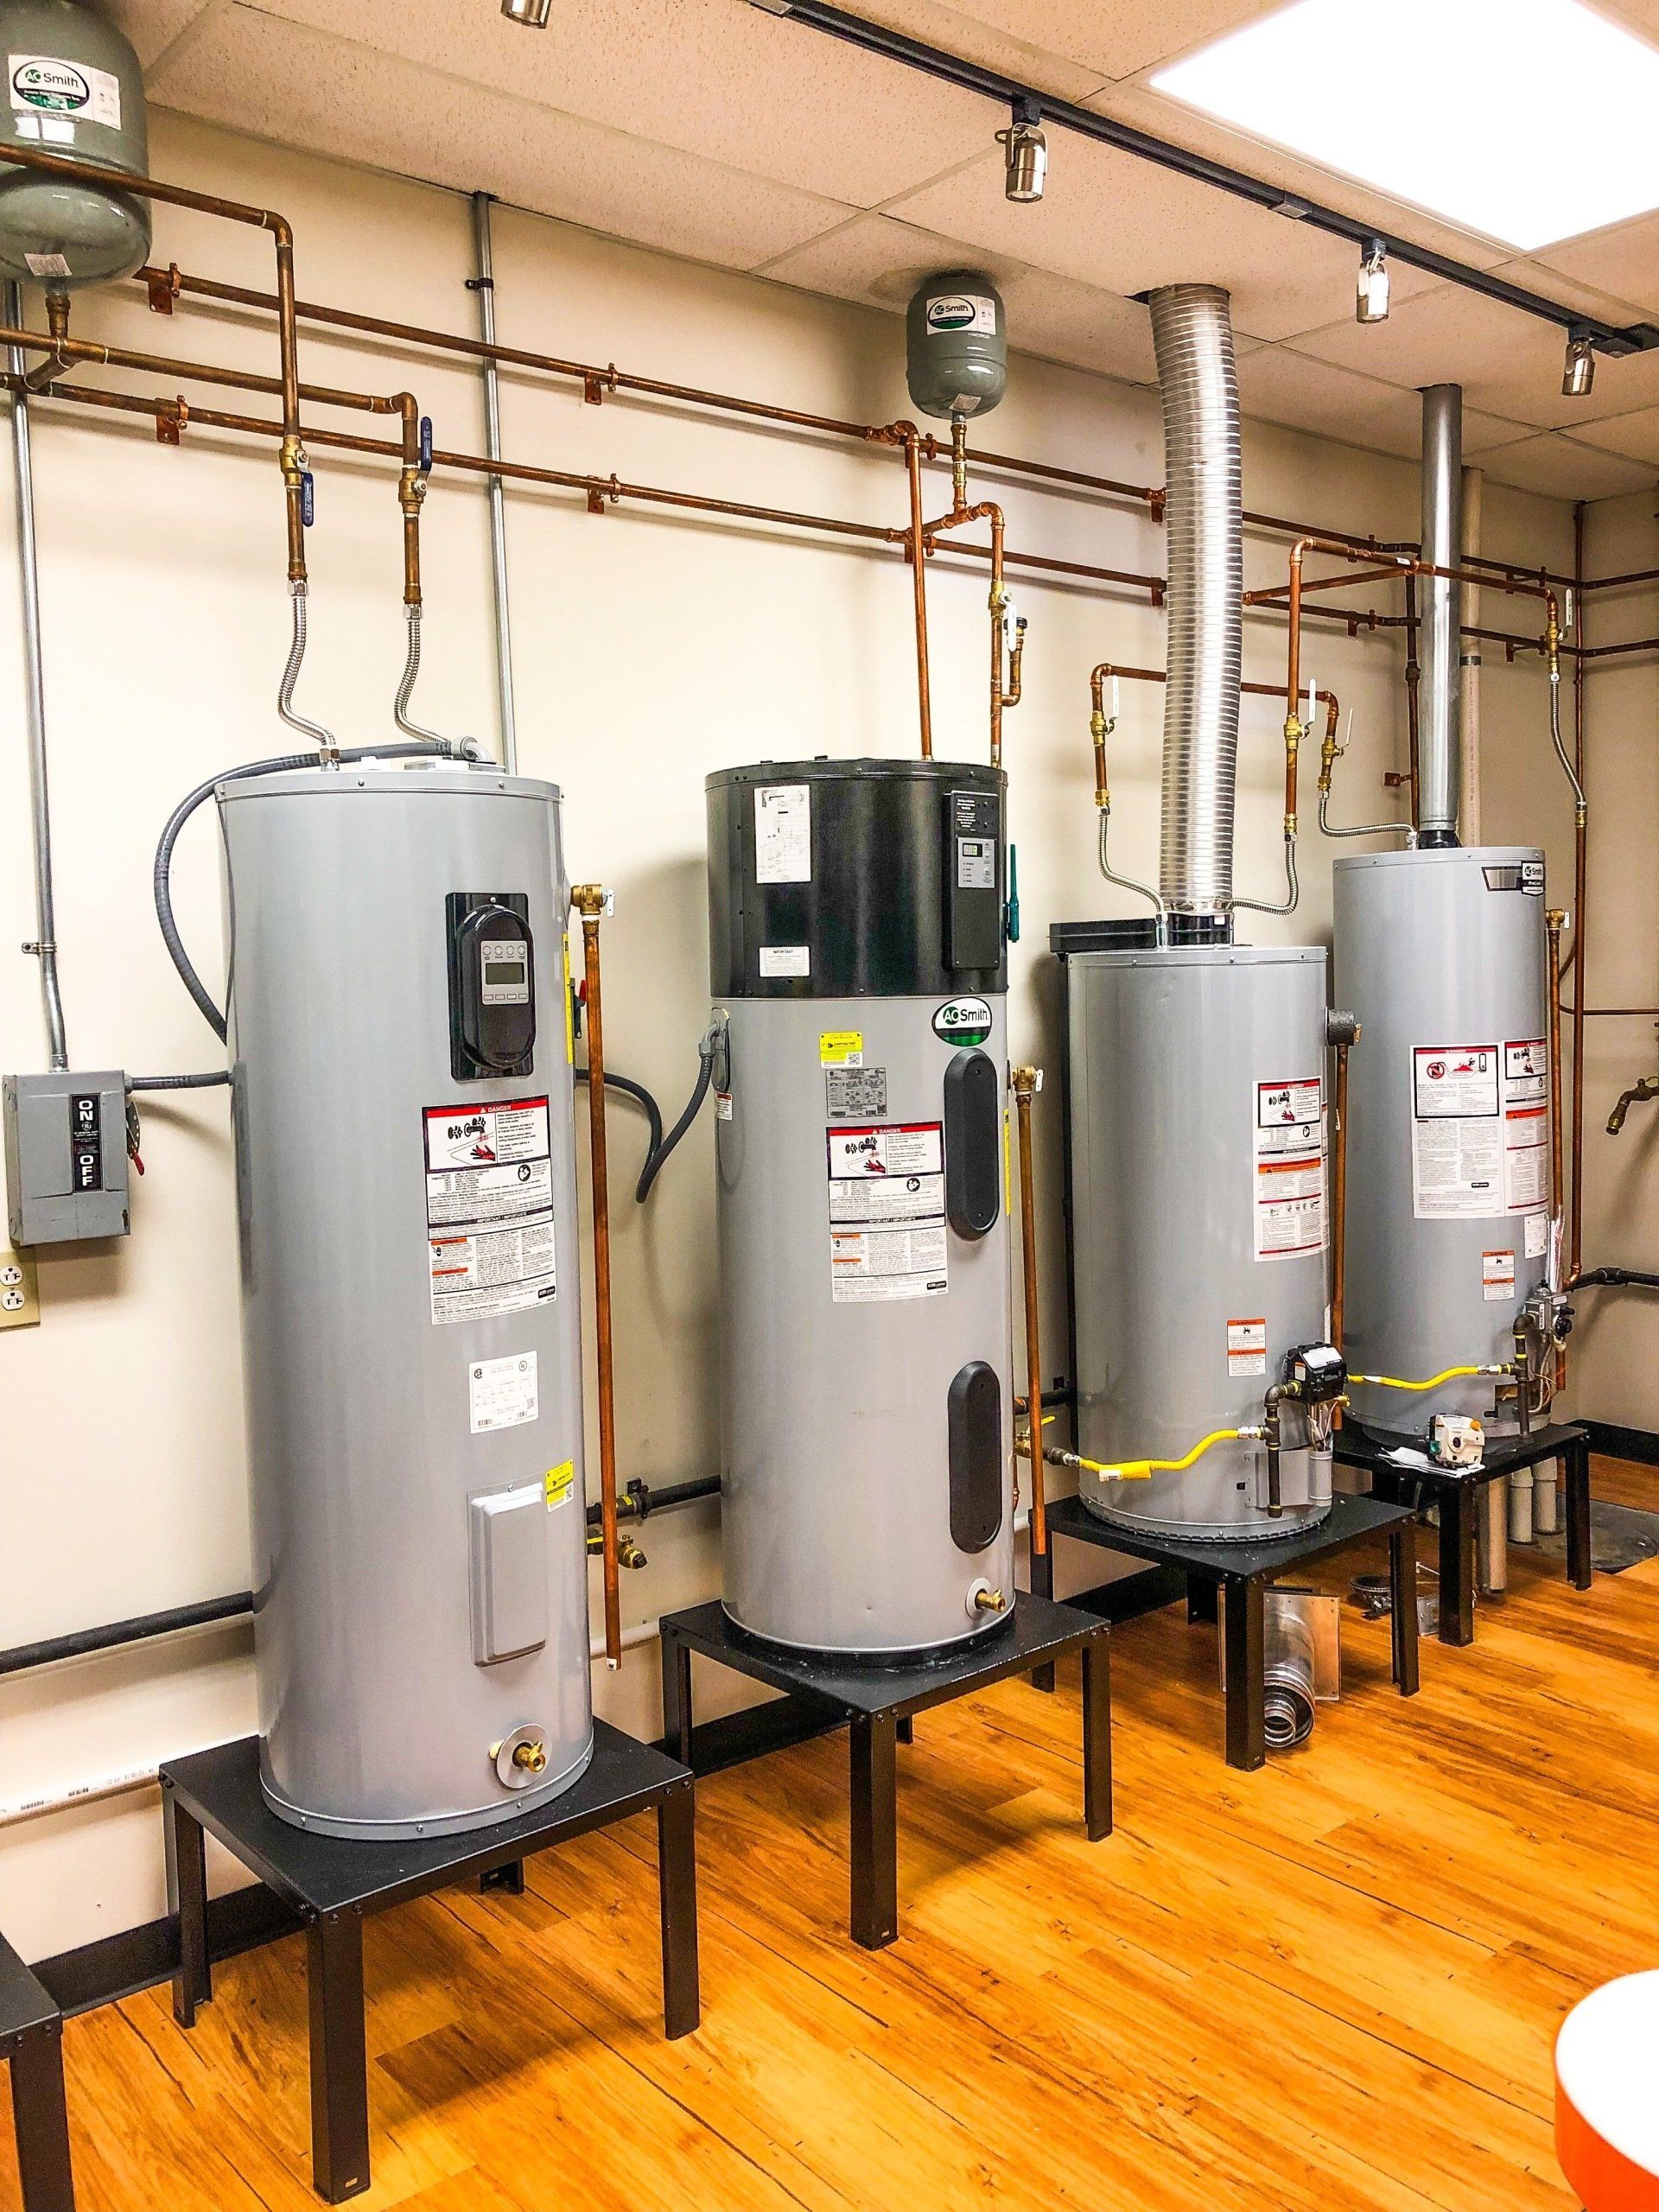 several water heaters in a row